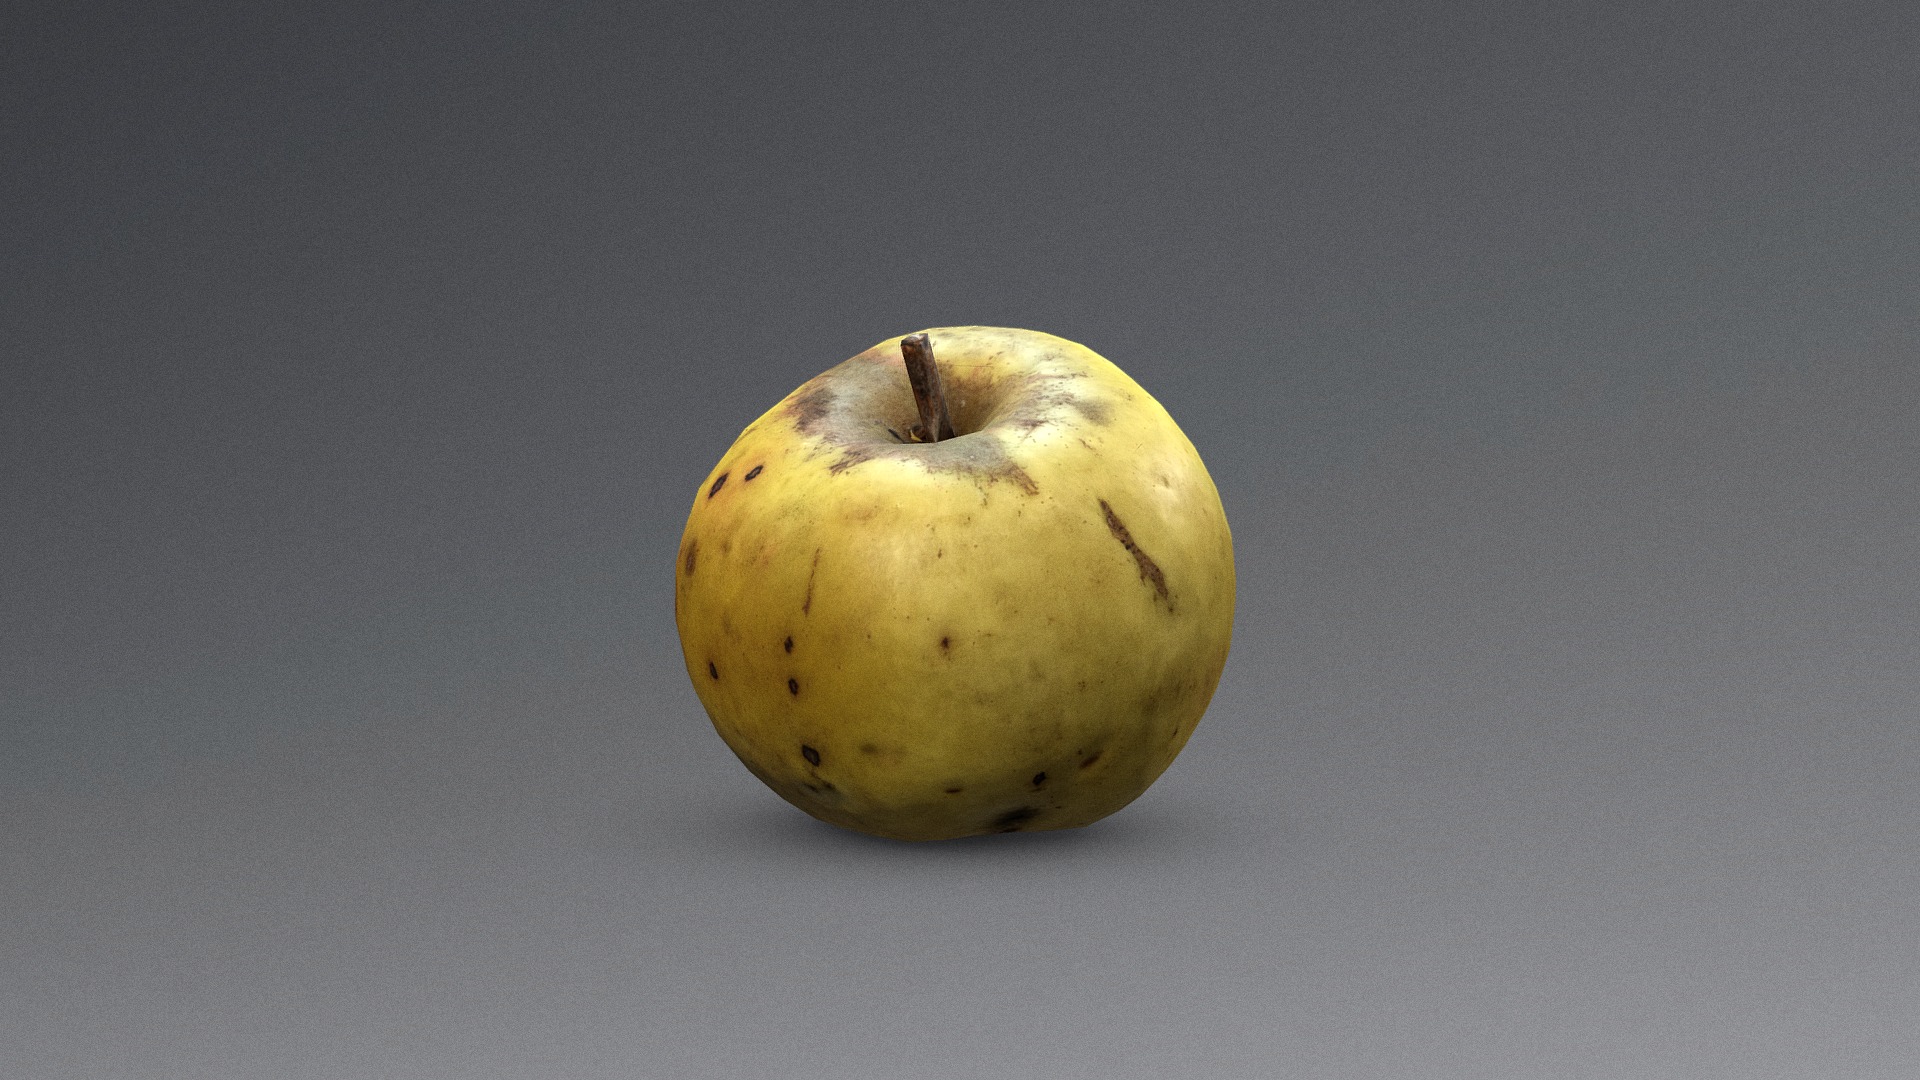 3D model Maschanzker Apple 4 - This is a 3D model of the Maschanzker Apple 4. The 3D model is about a potato on a grey surface.